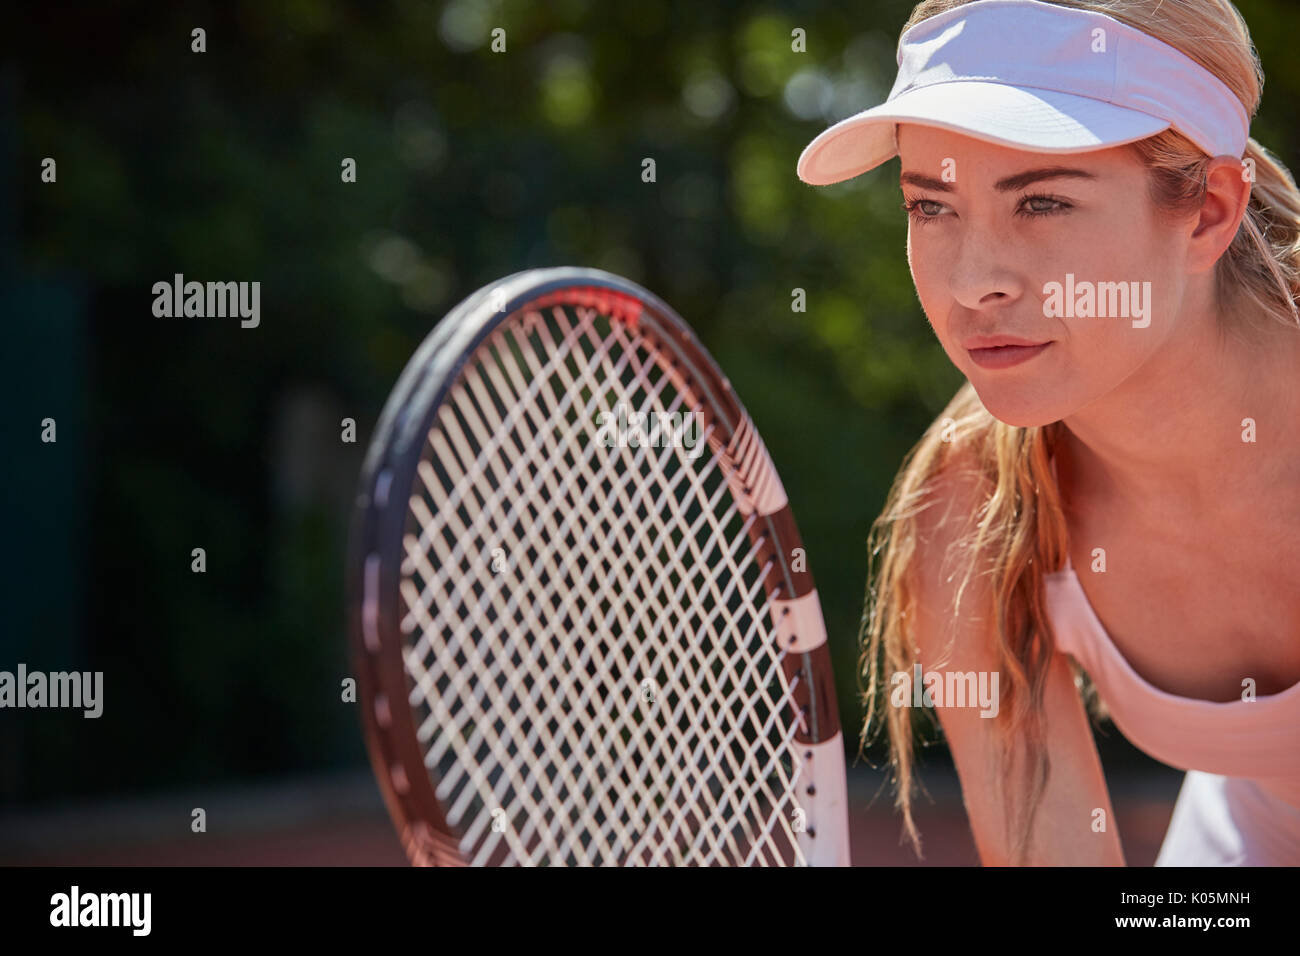 Focused young female tennis player holding tennis racket Stock Photo